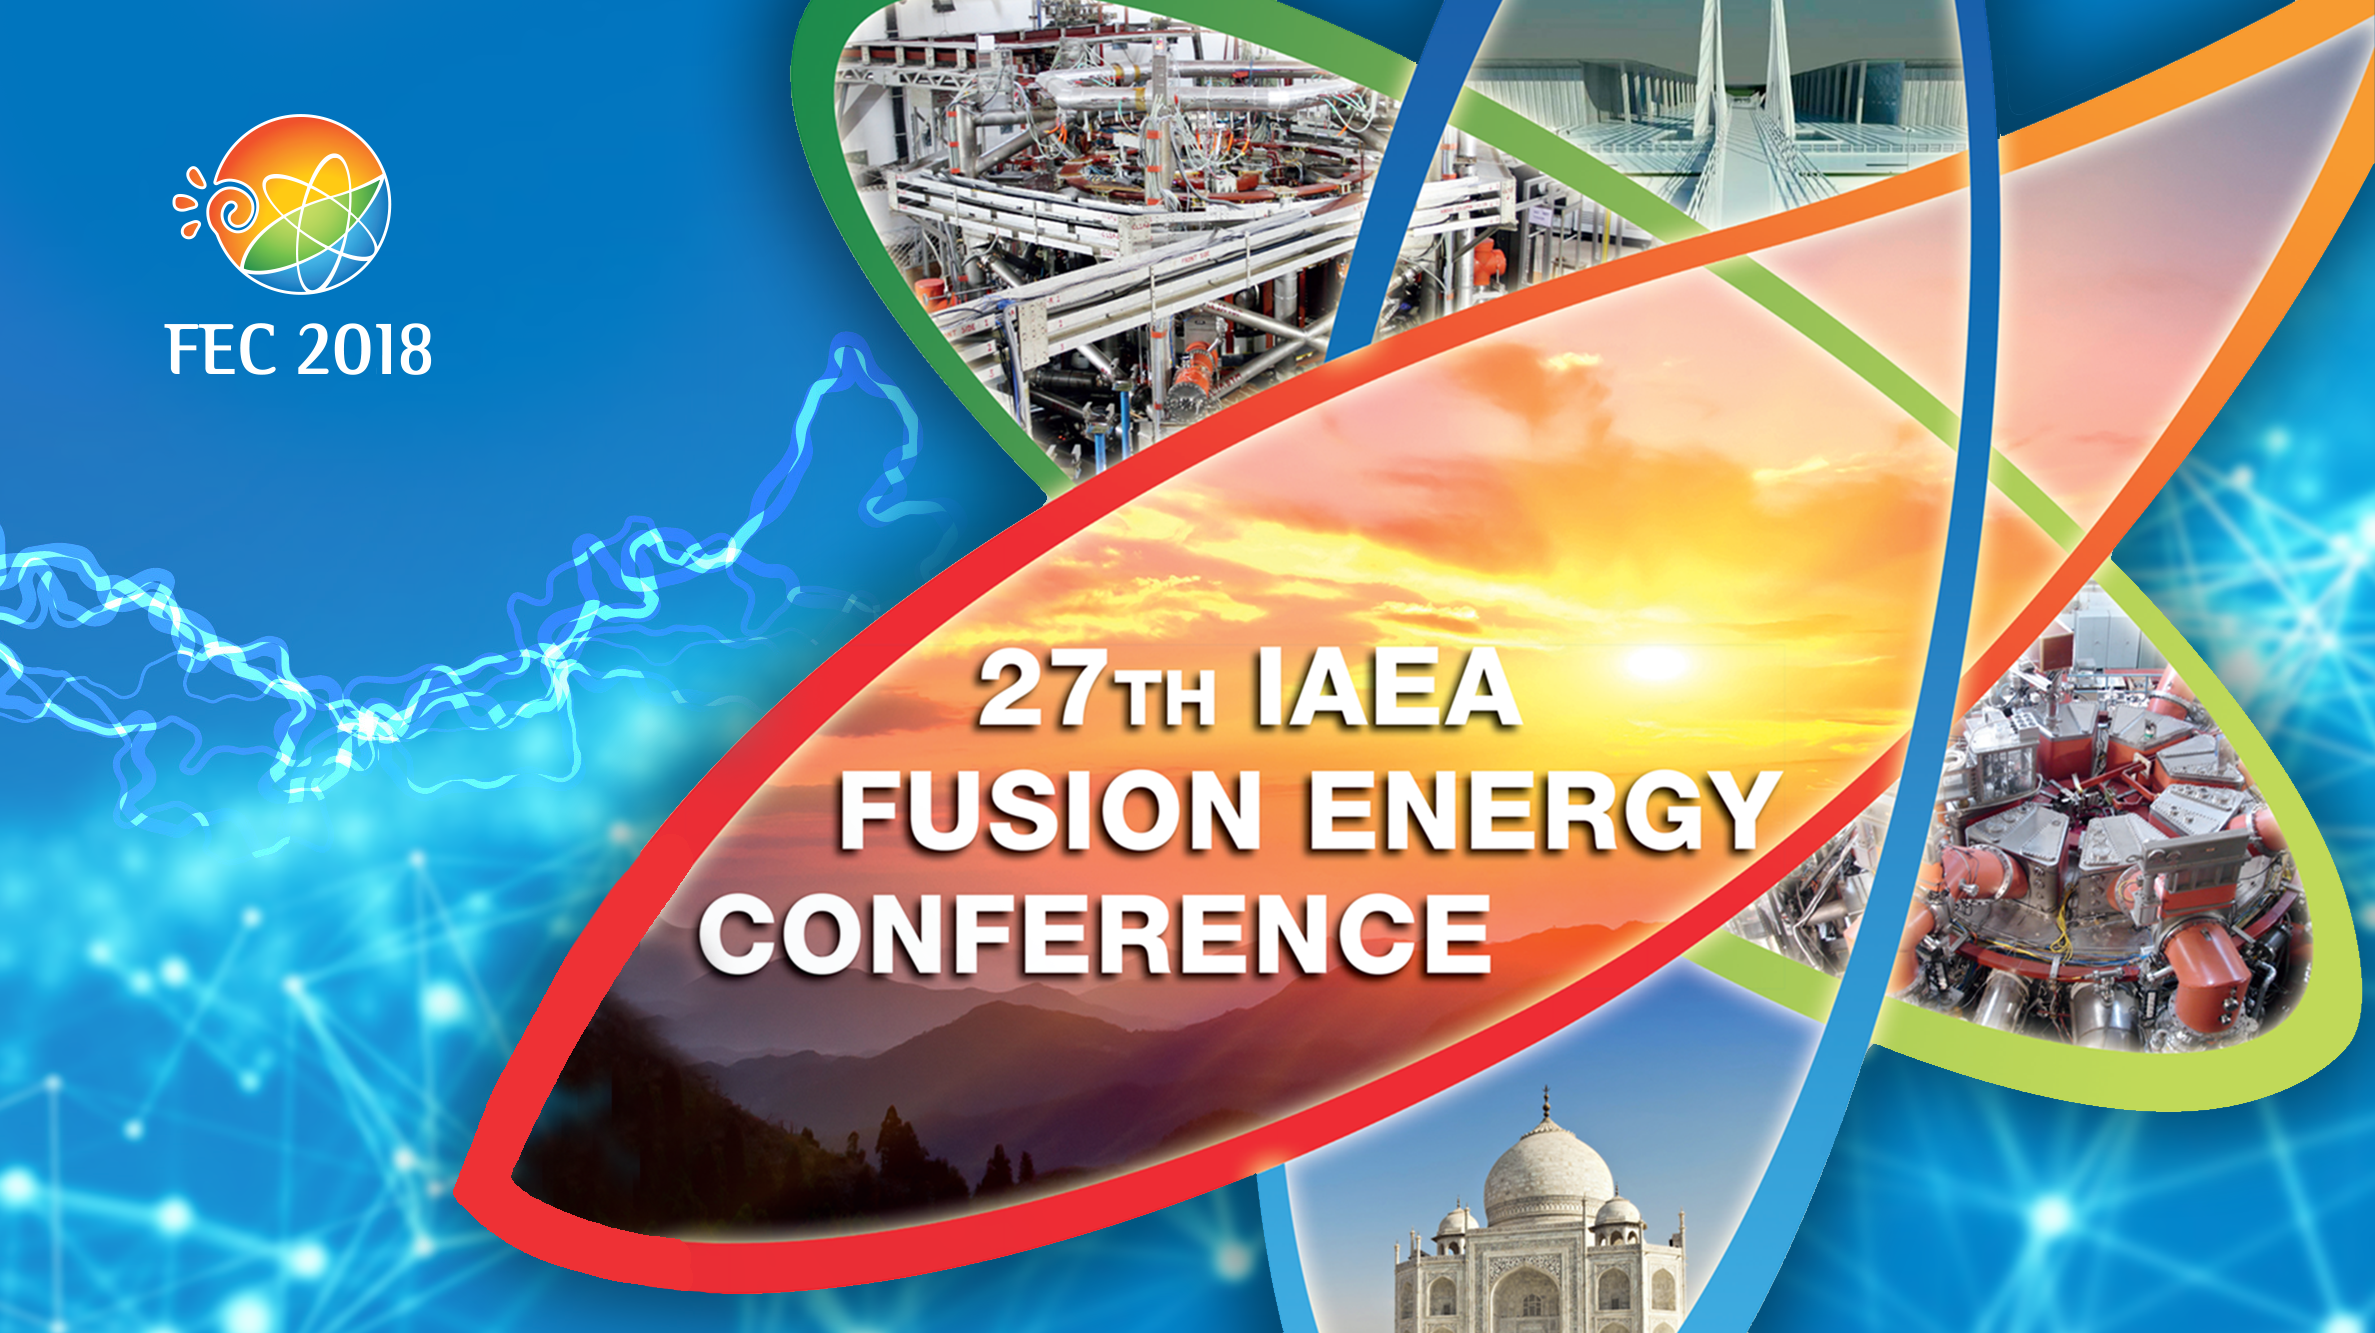 27th IAEA Fusion Energy Conference Call for Papers by 12 March IAEA